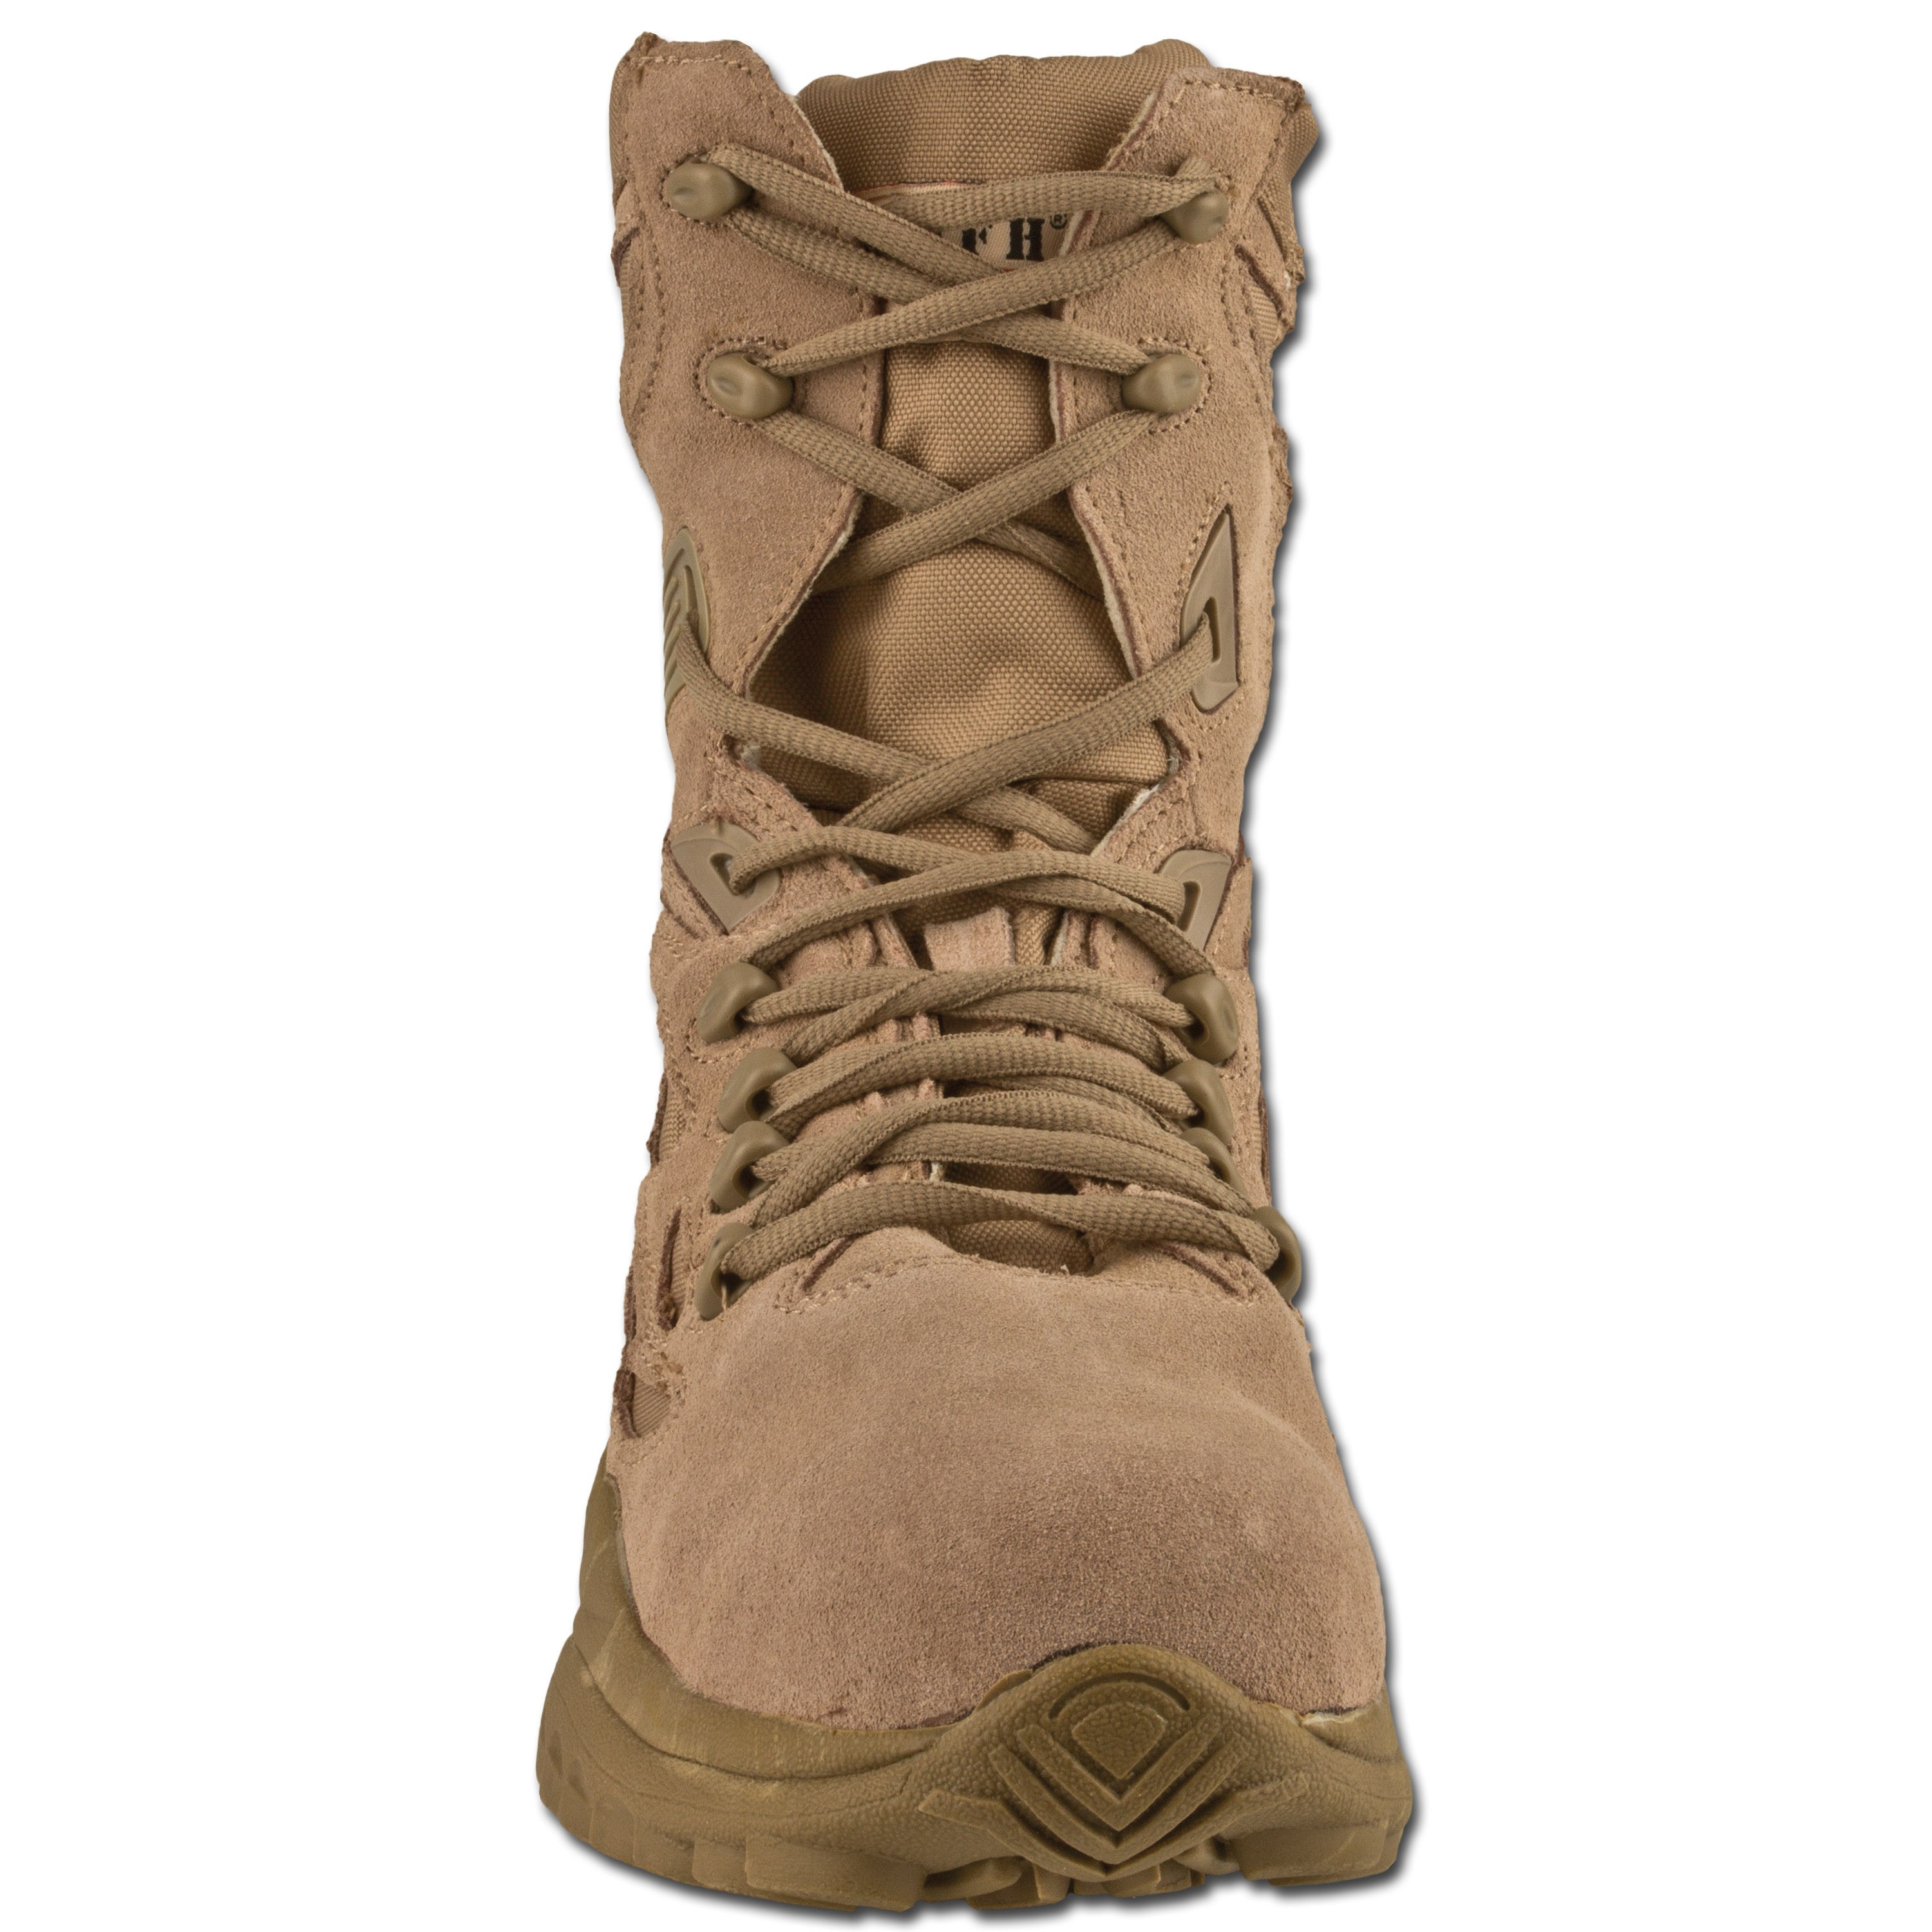 Purchase the MFH Tactical Boots coyote by ASMC